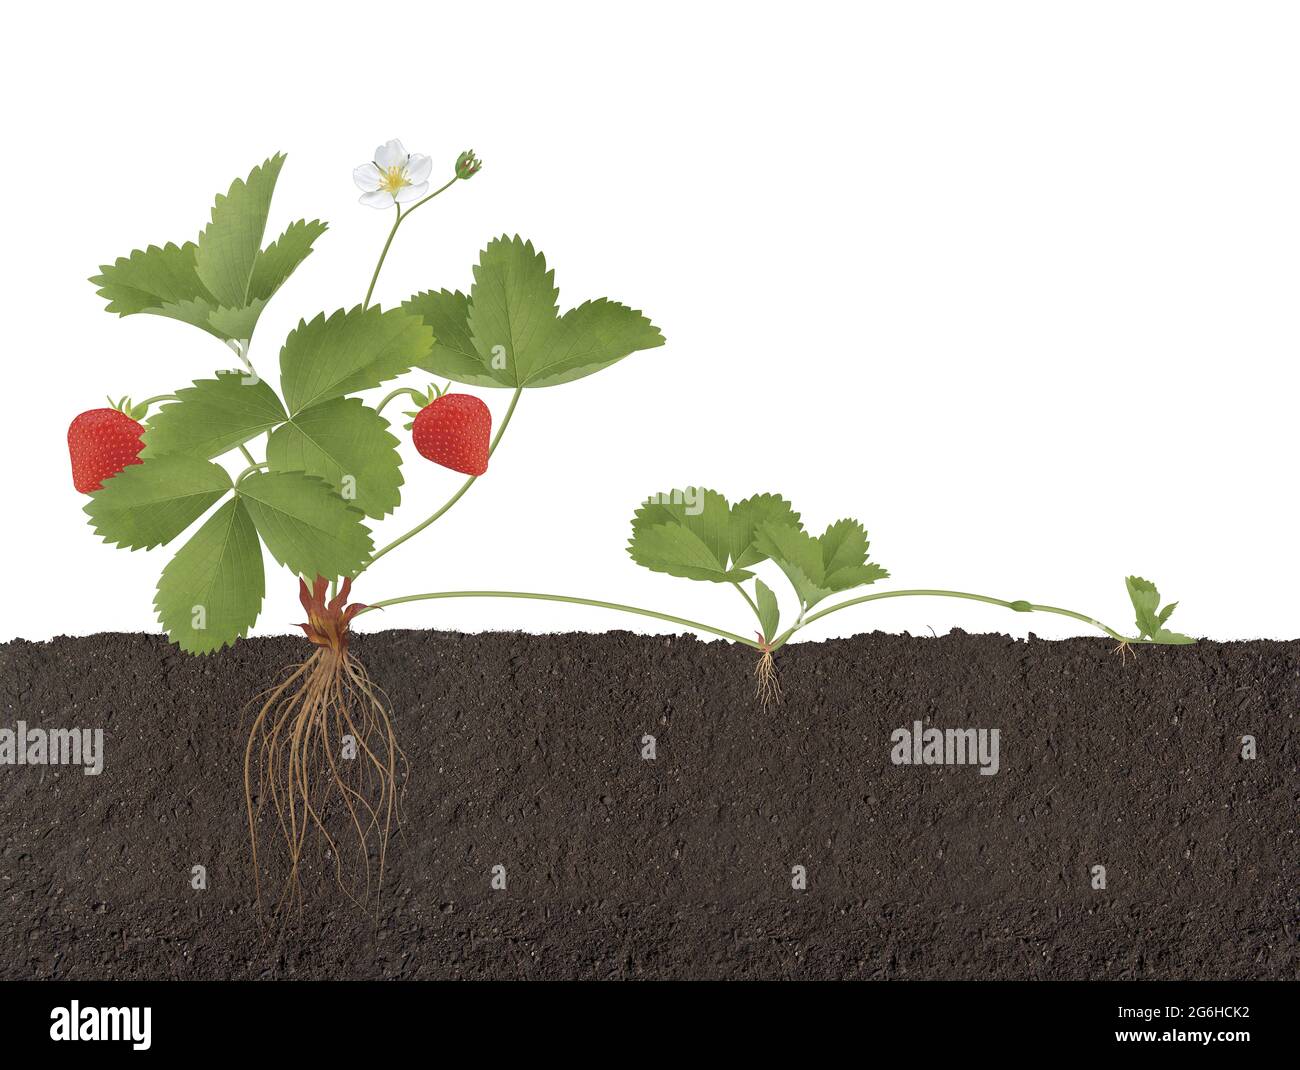 Strawberry plant with roots, flowers and fruits reproduction Stock Photo -  Alamy